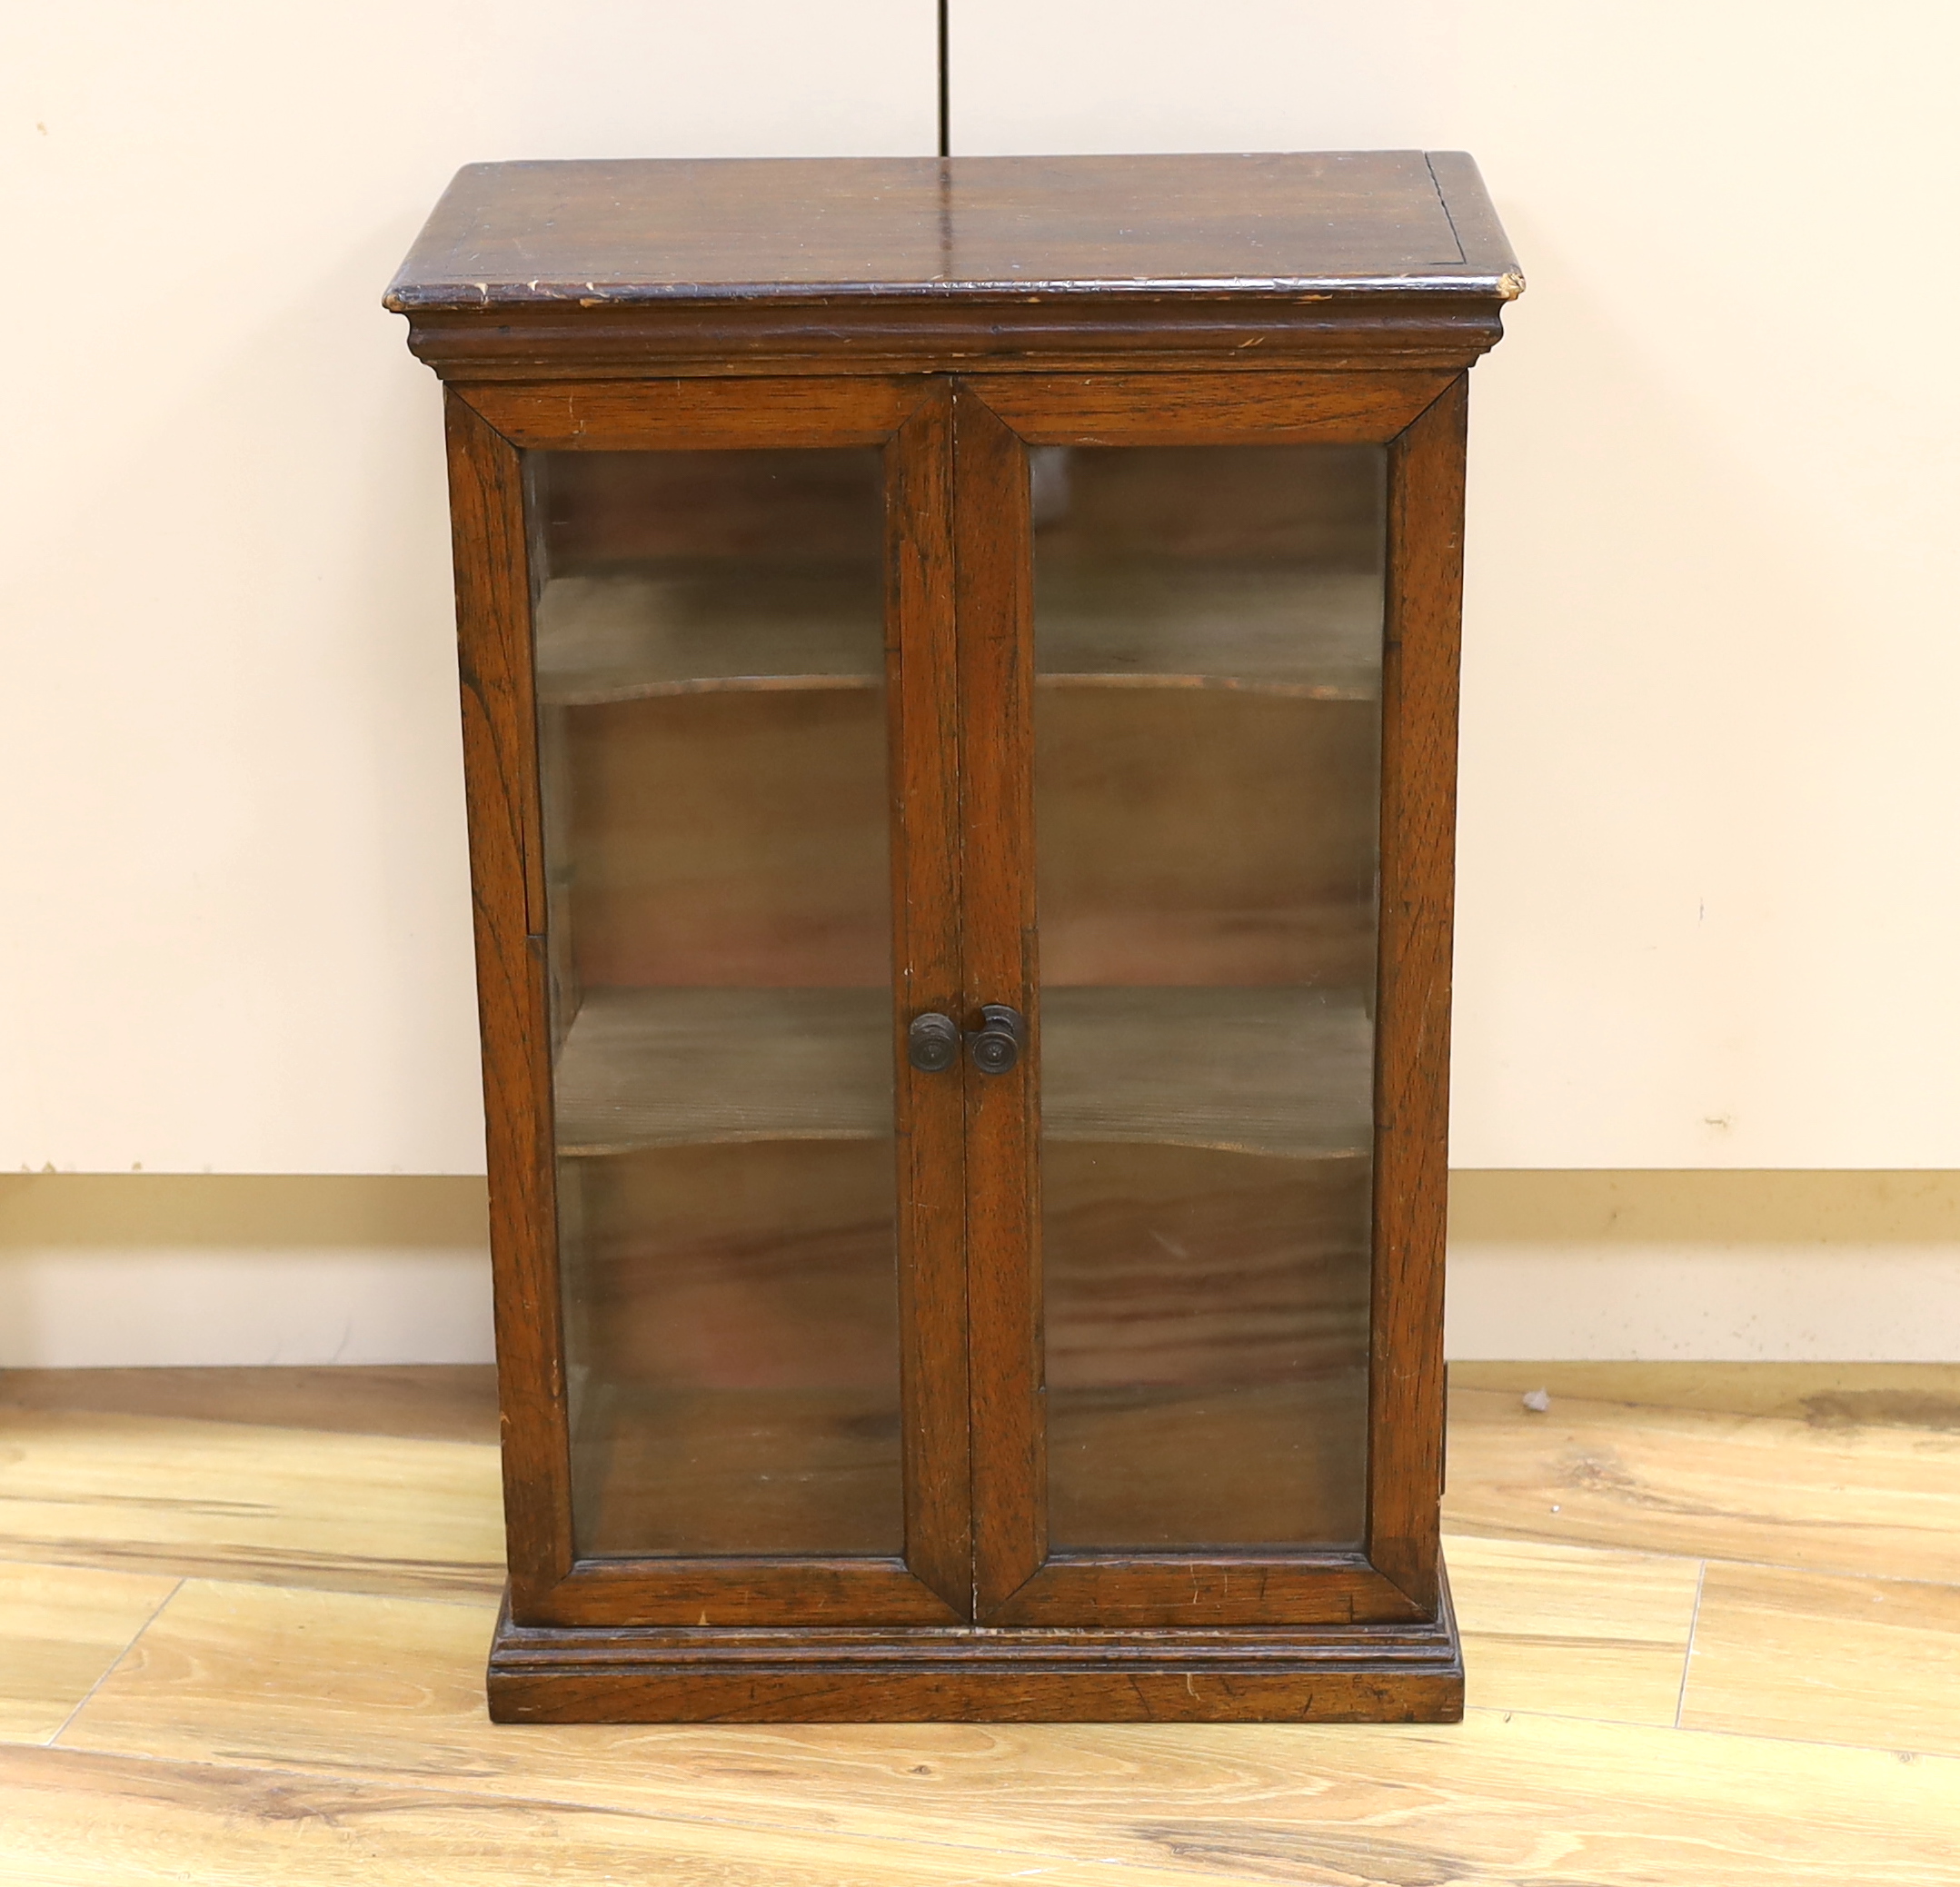 A small early 20th century glazed oak and pine two door shop display cabinet, 65.5 x 45 x 26cm